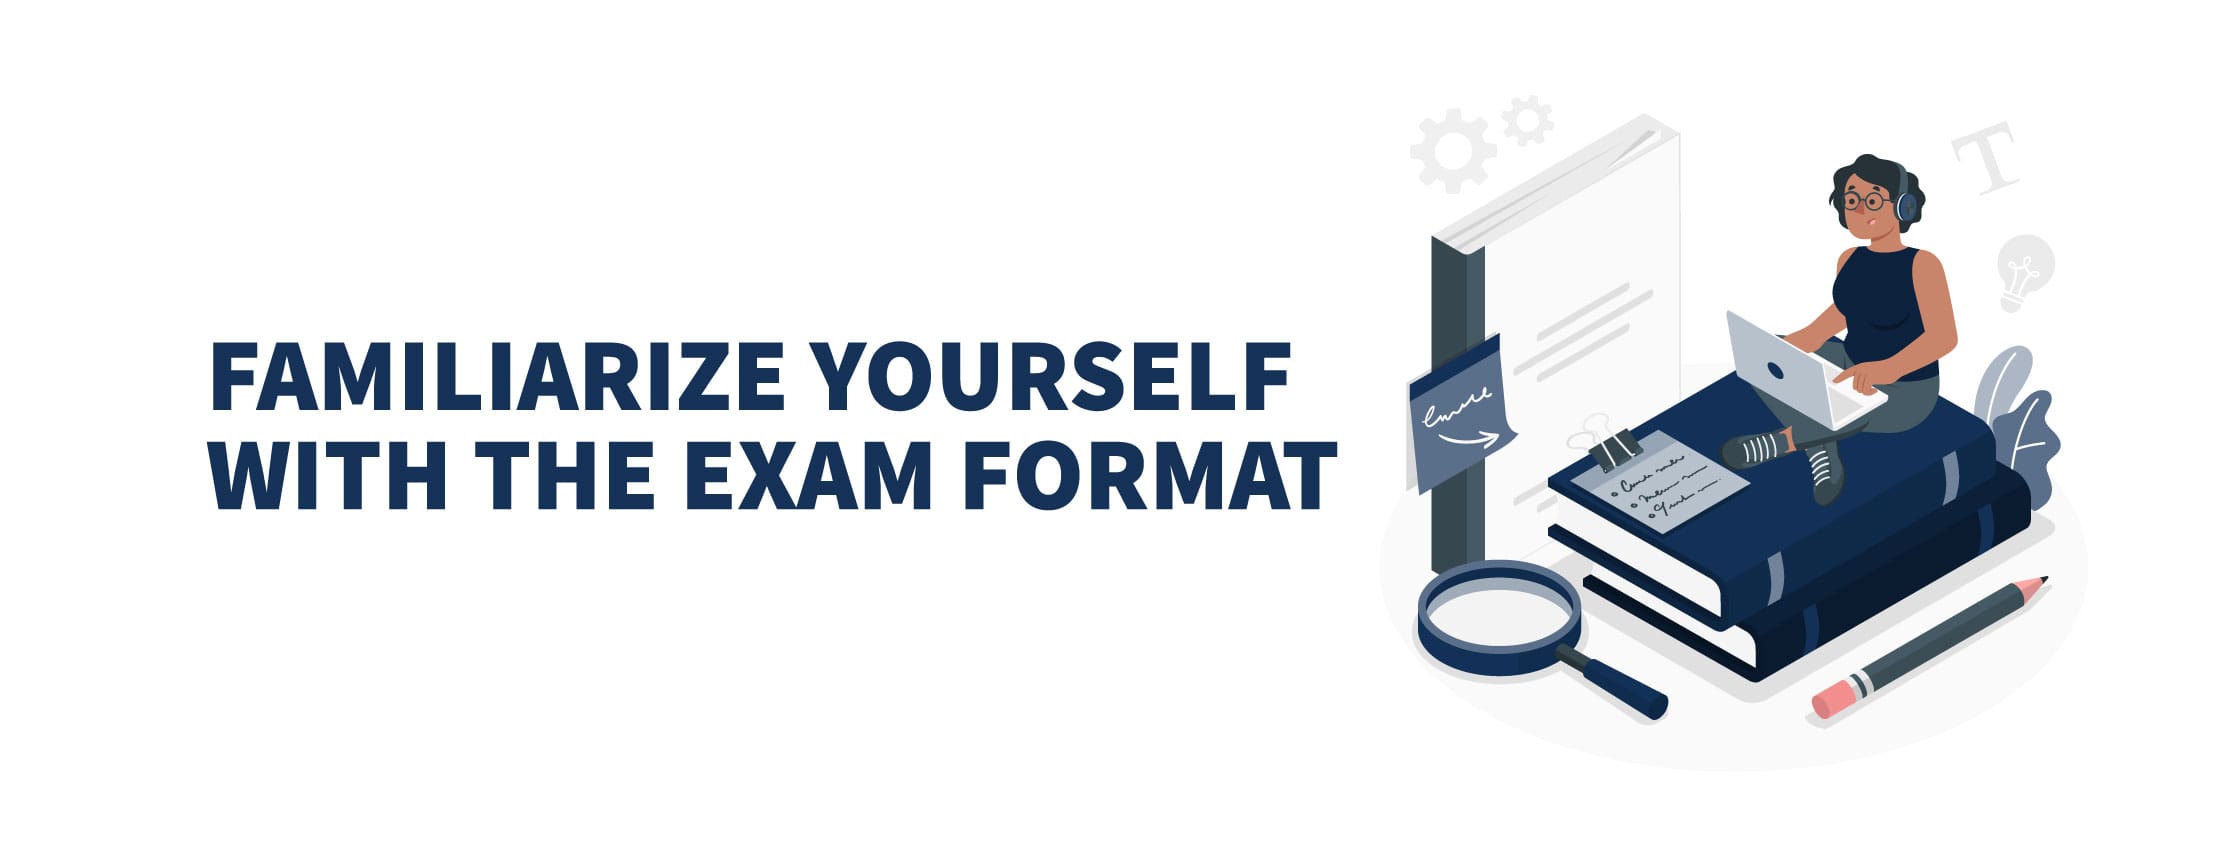 Familiarize Yourself with the Exam Format